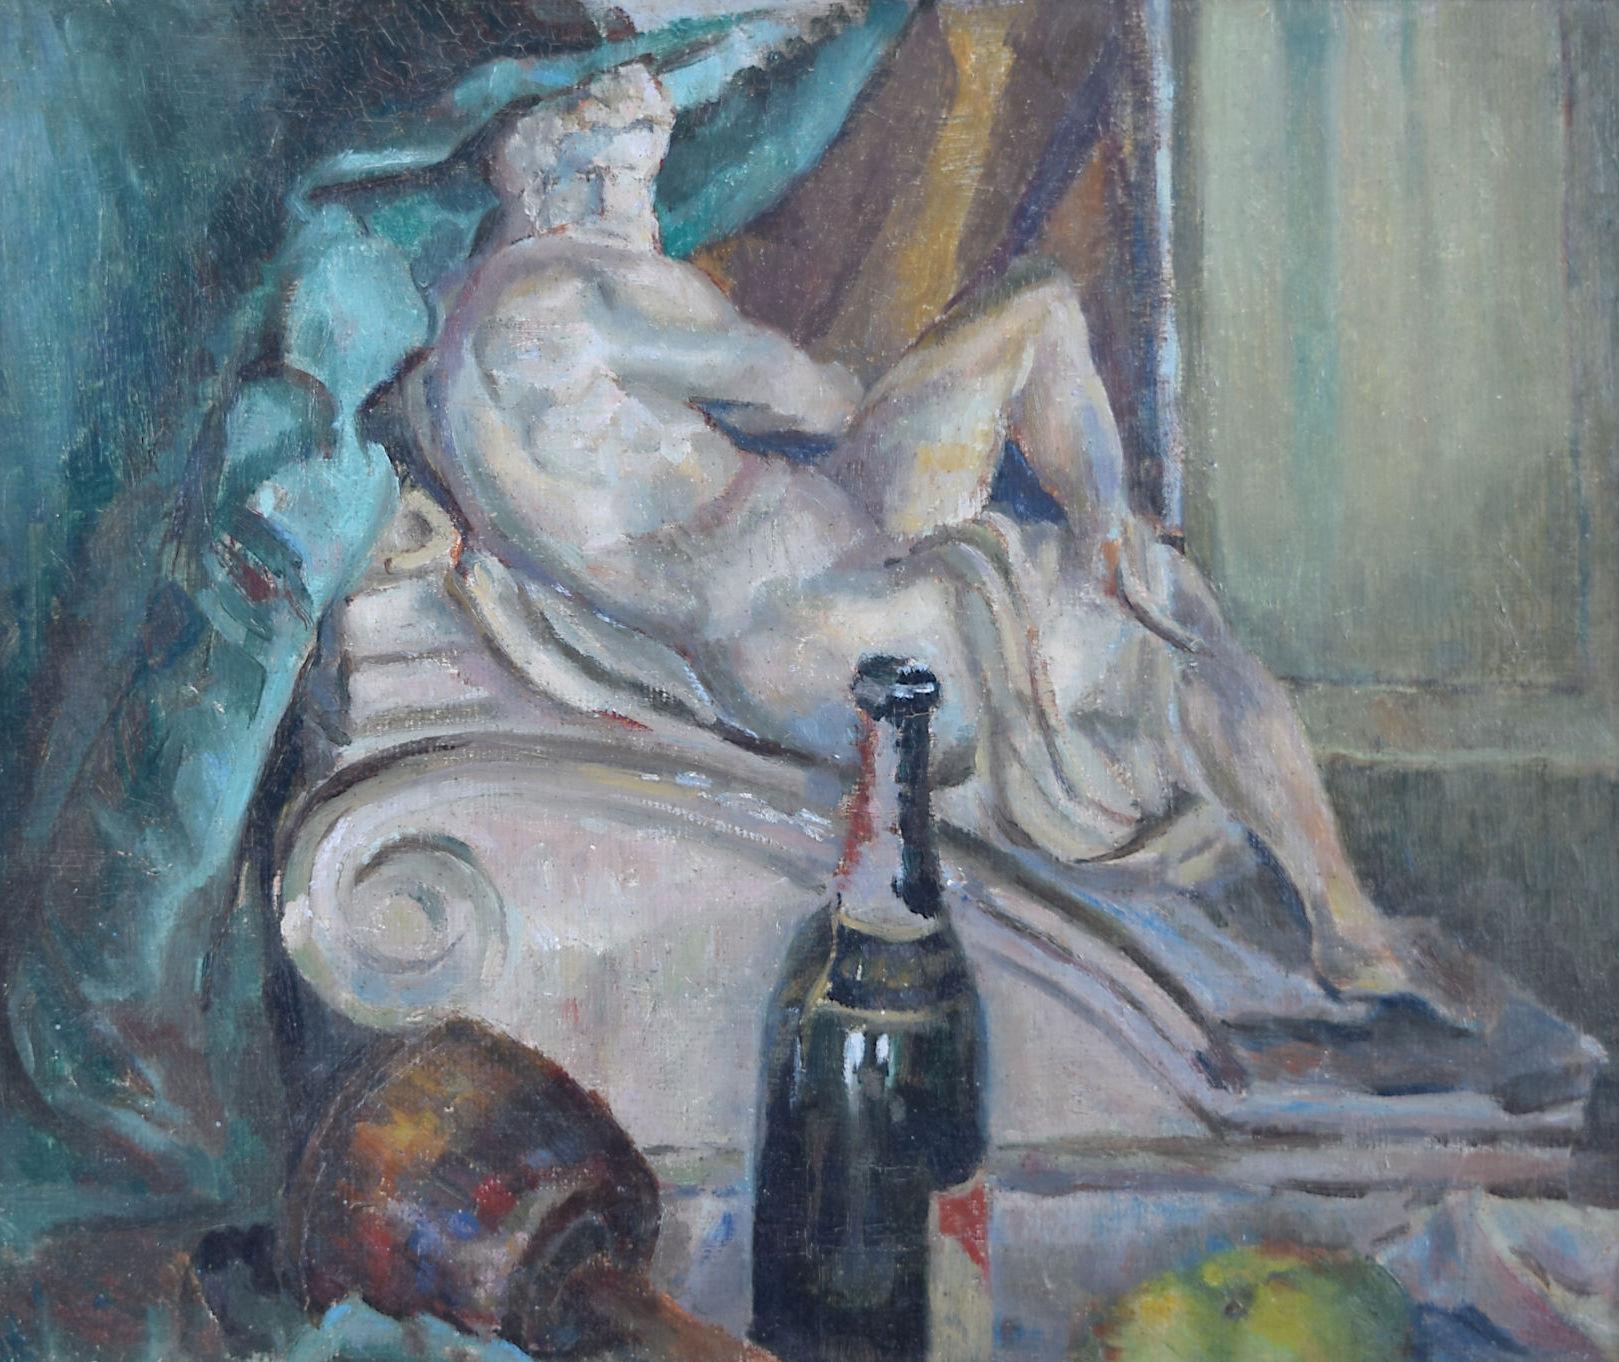 Terry Frost 'Bottle and Statue' oil painting abstract still life interior